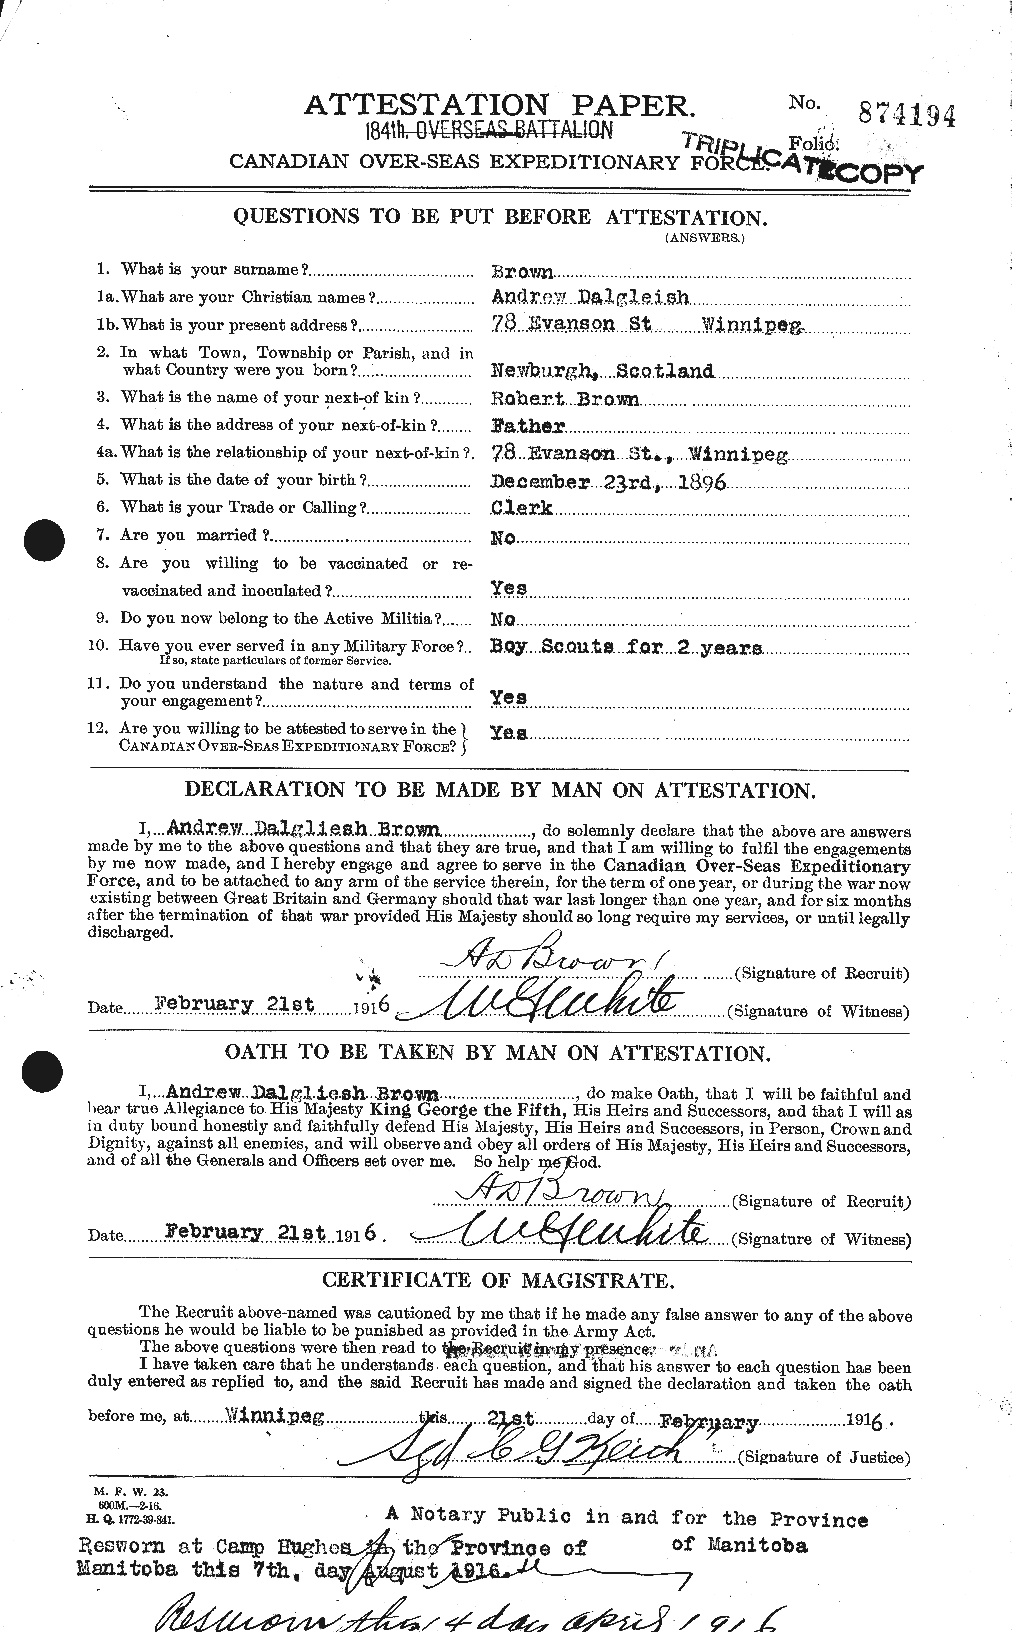 Personnel Records of the First World War - CEF 263718a